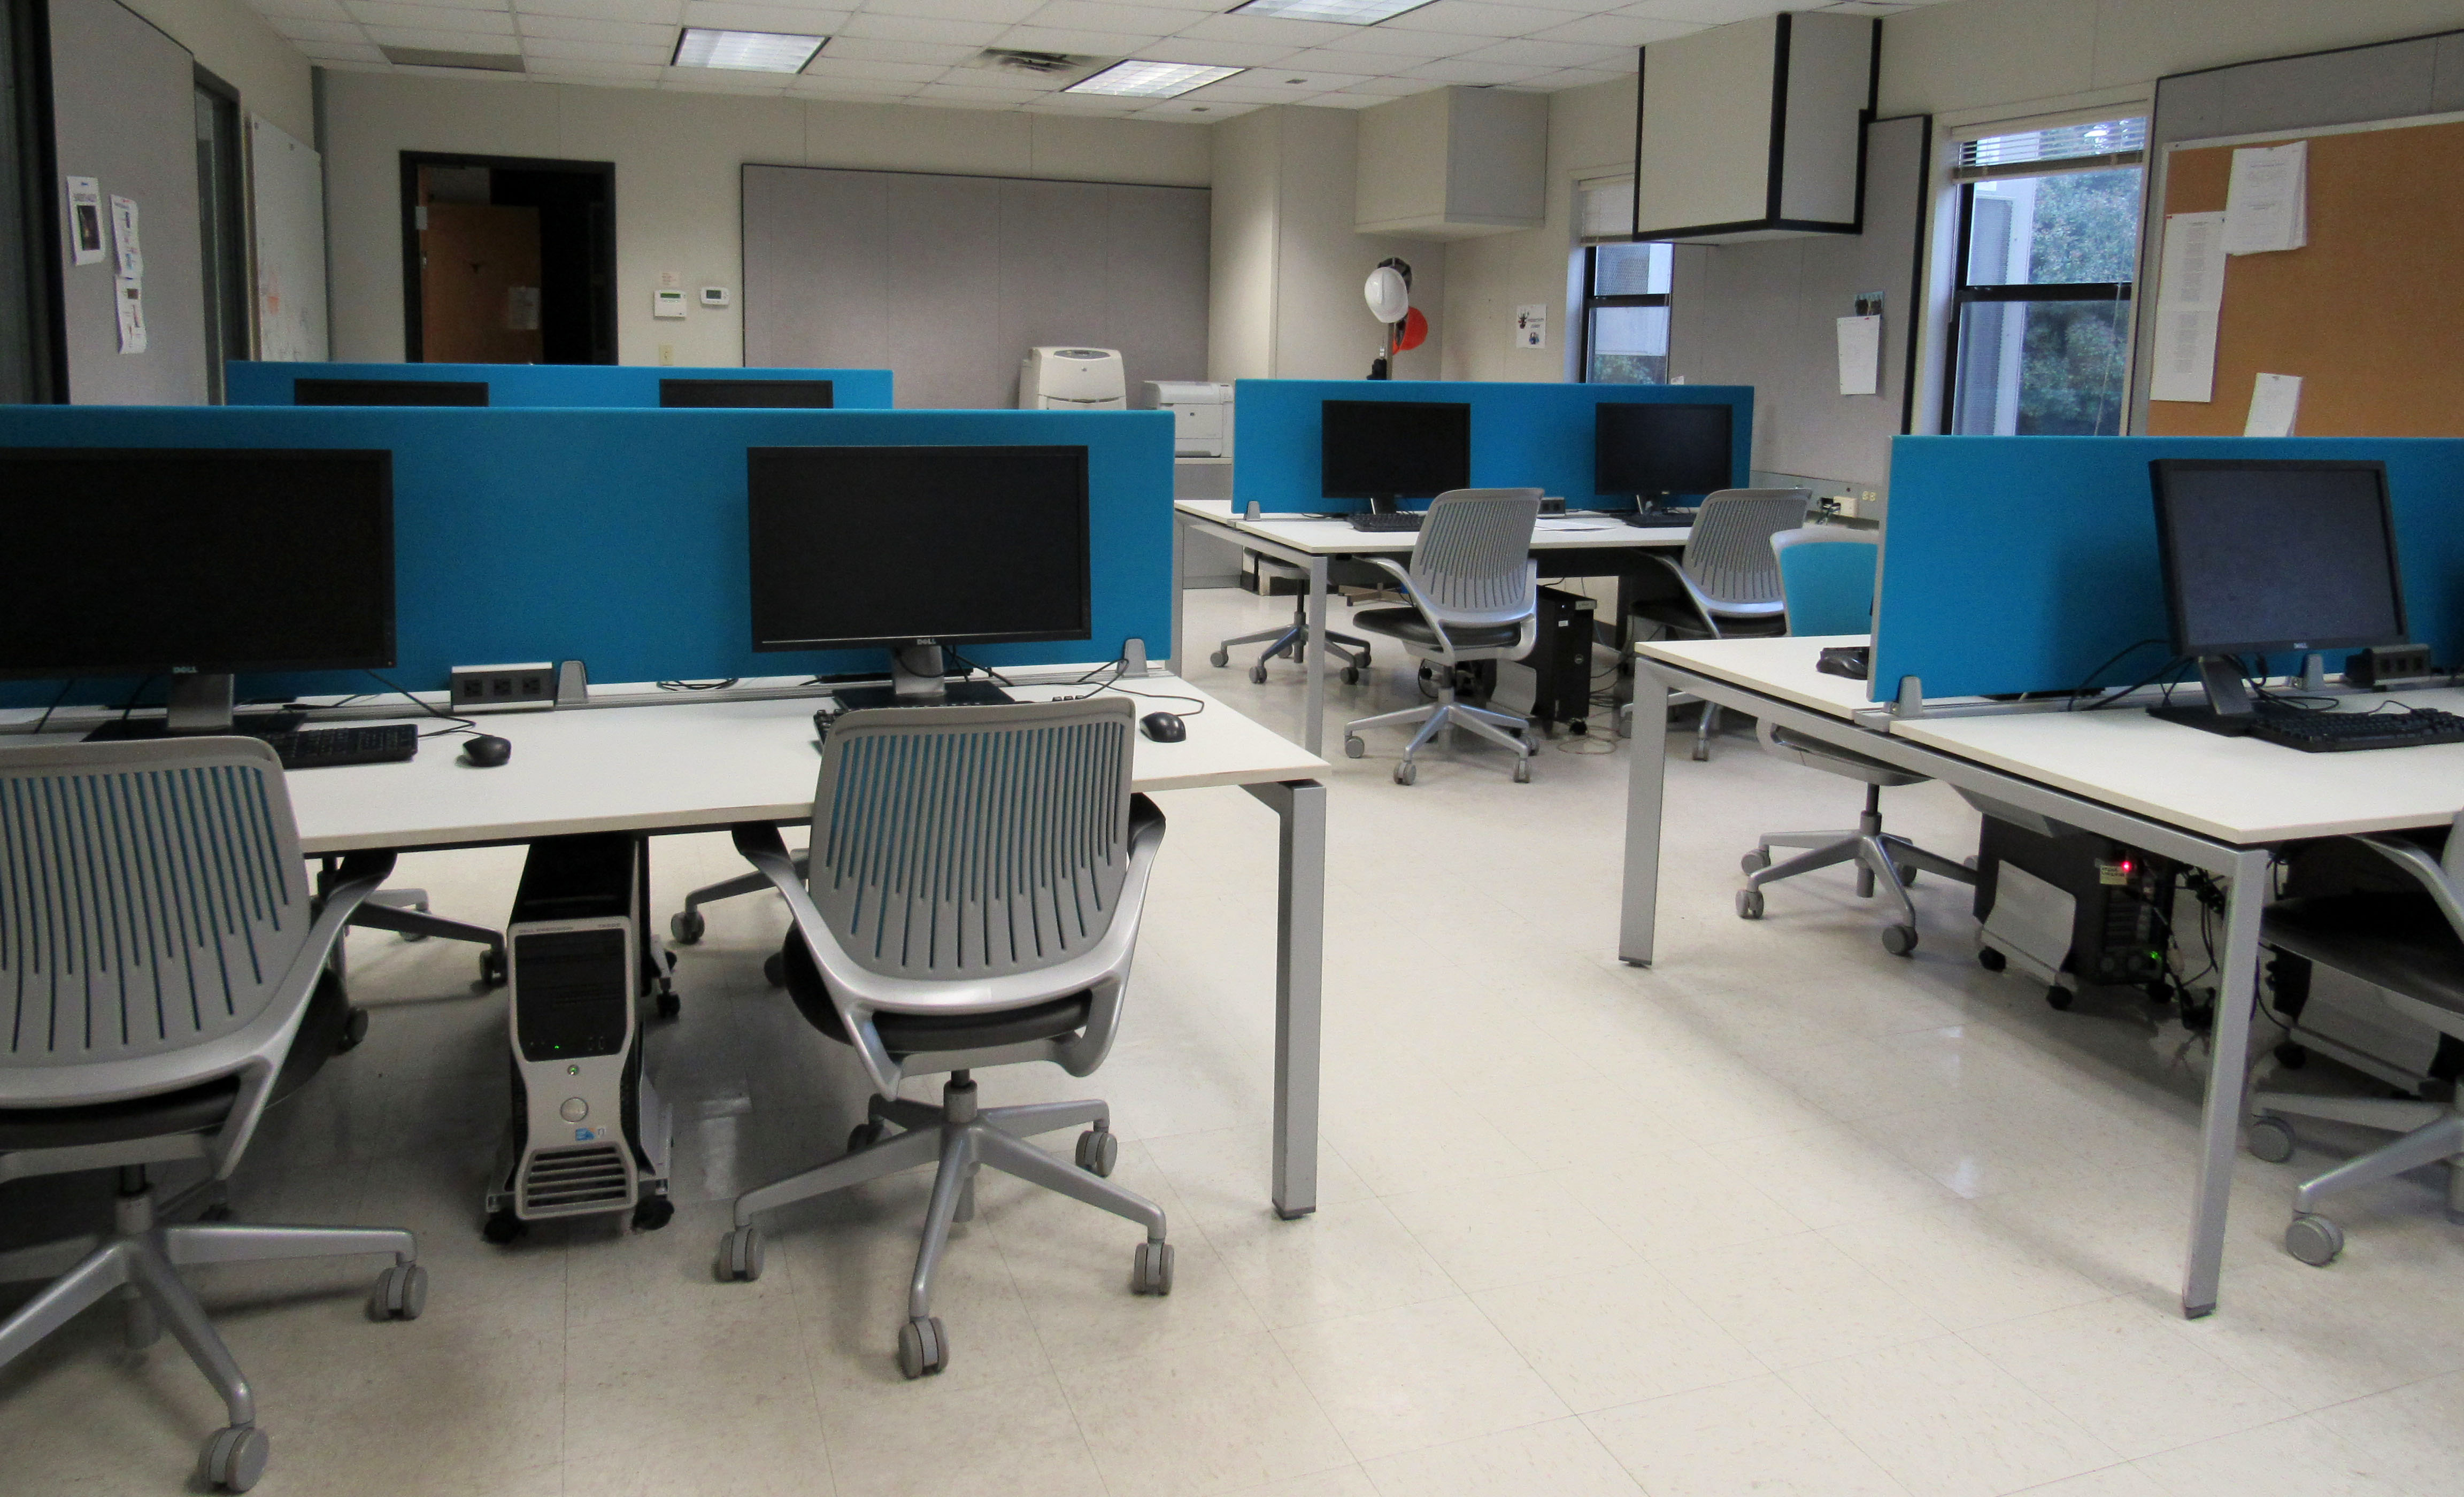 interior of computer lab classroom with chairs and desks